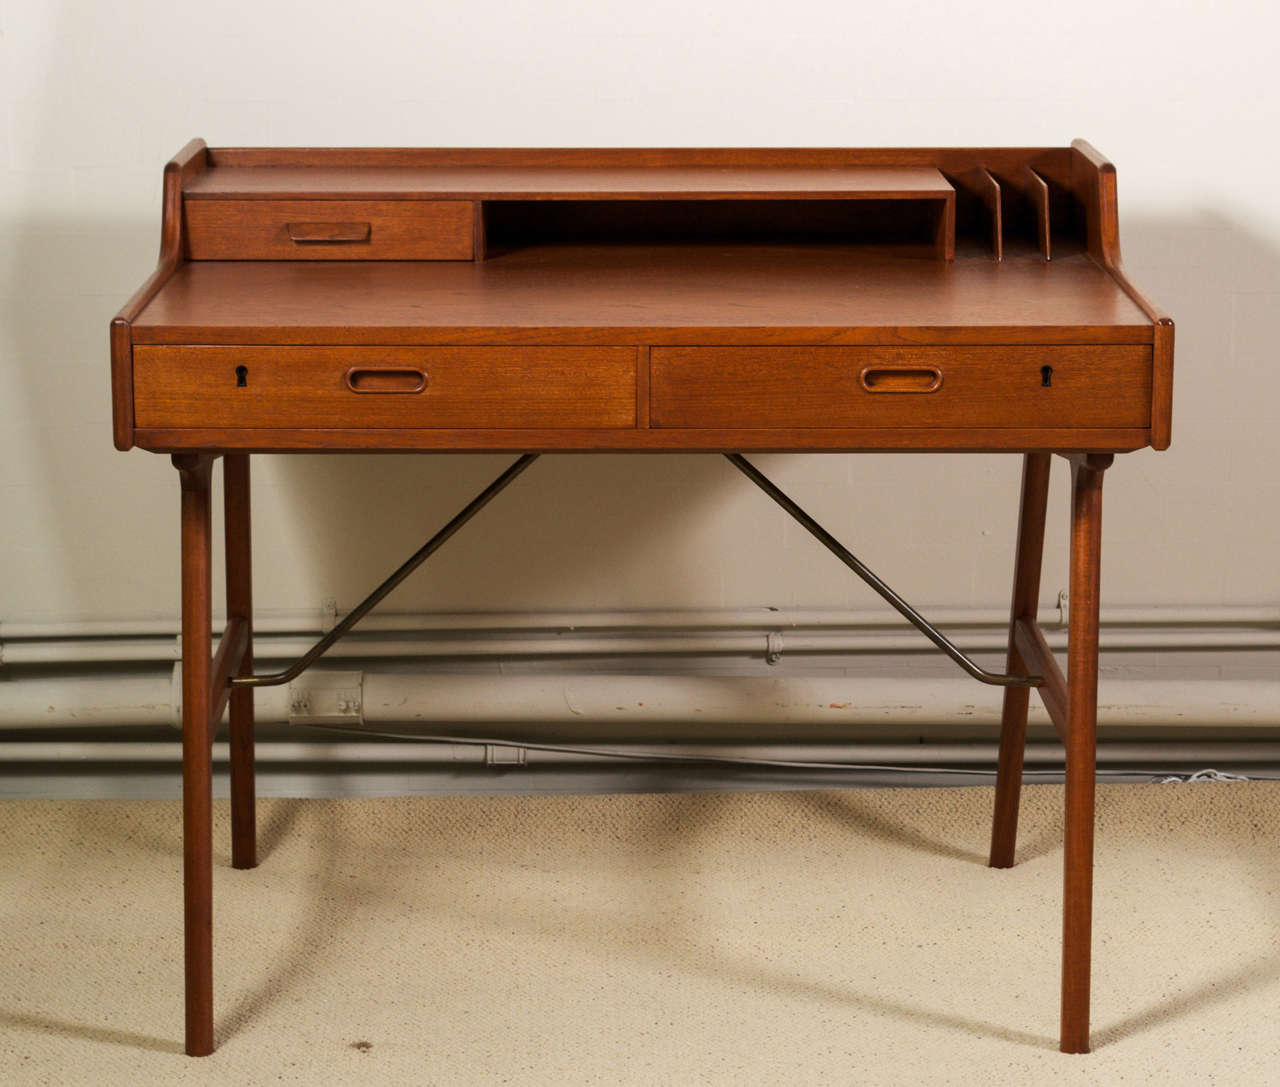 For your consideration is Danish Modern desk in teak by: Arne Iversen Wahl, for Vinde Mobelfabrik.  Designed in in 1961 this petite desk is perfectly scaled for city living.  It's small yet chic....It's sleek yet architectural in its stylings..... 